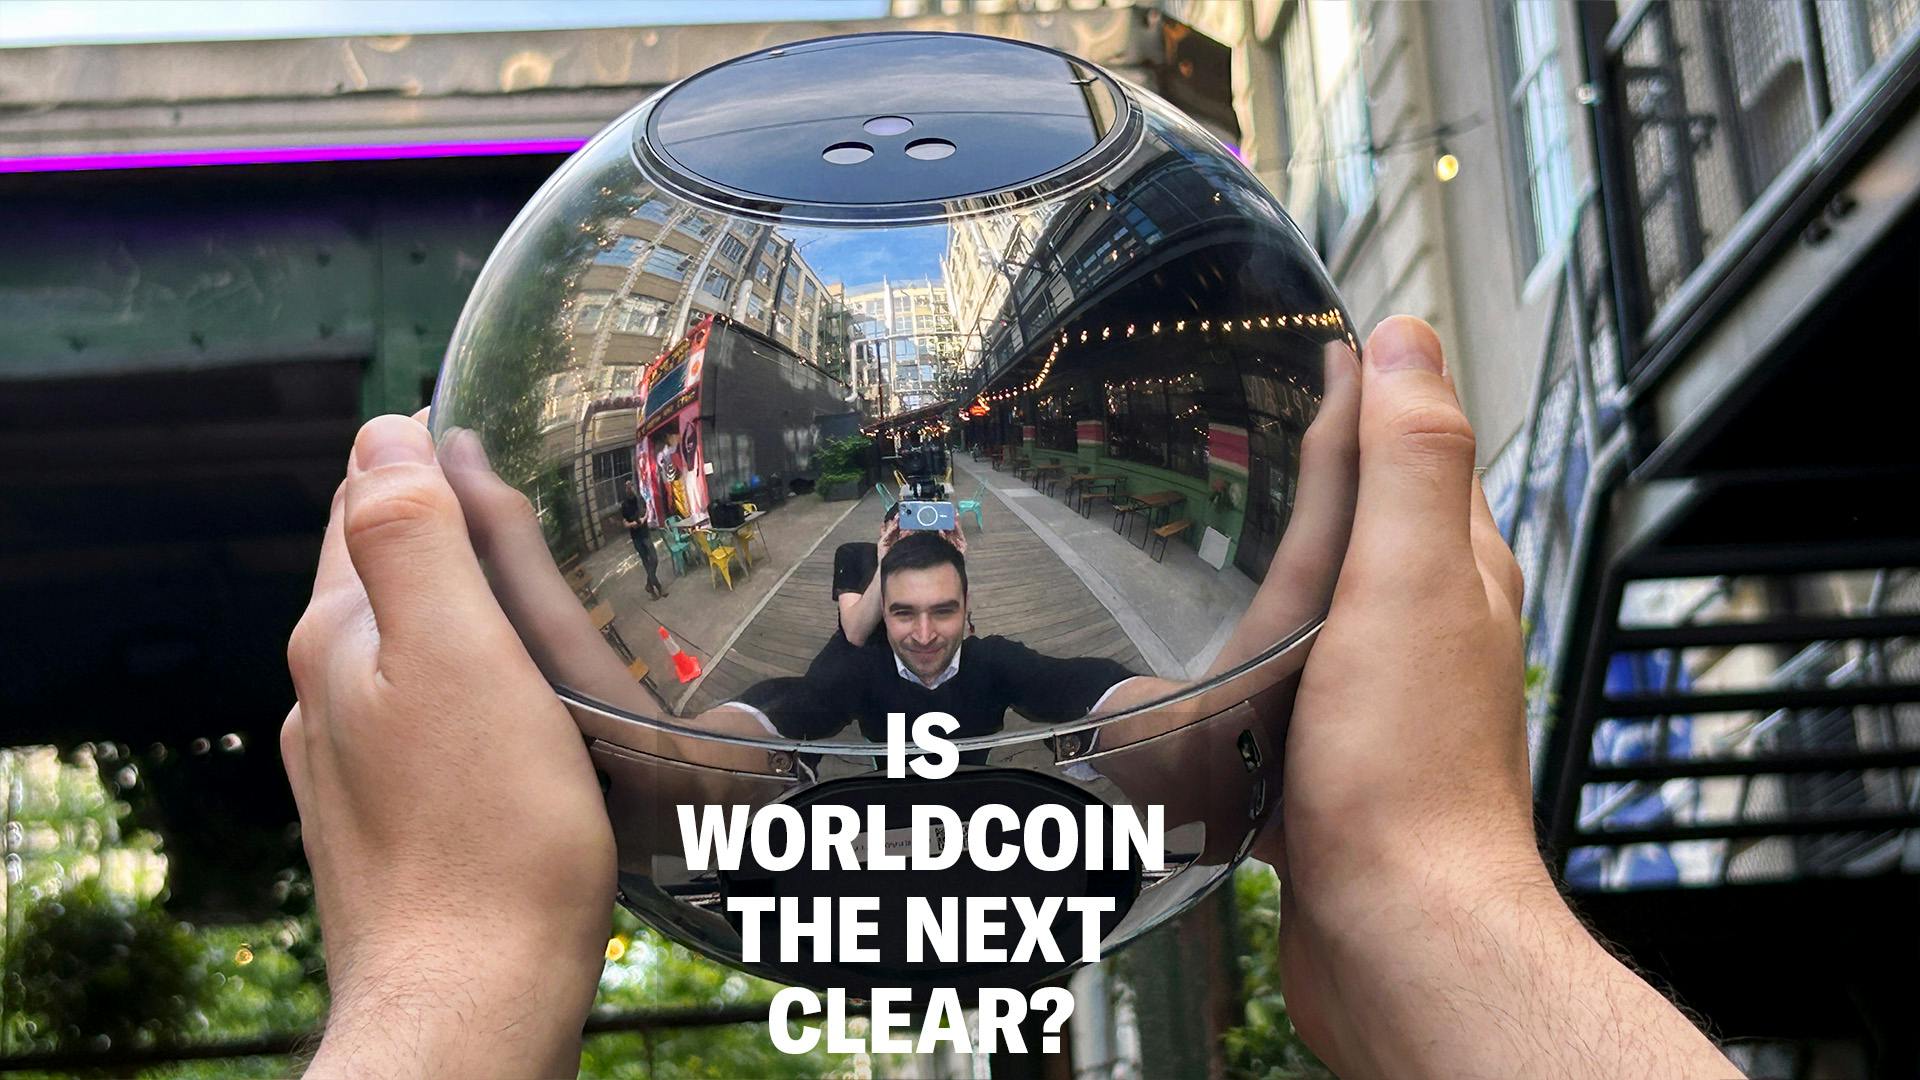 Worldcoin enables proof-of-personhood by letting users verify their iris scan is unique by using a proprietary Orb device.